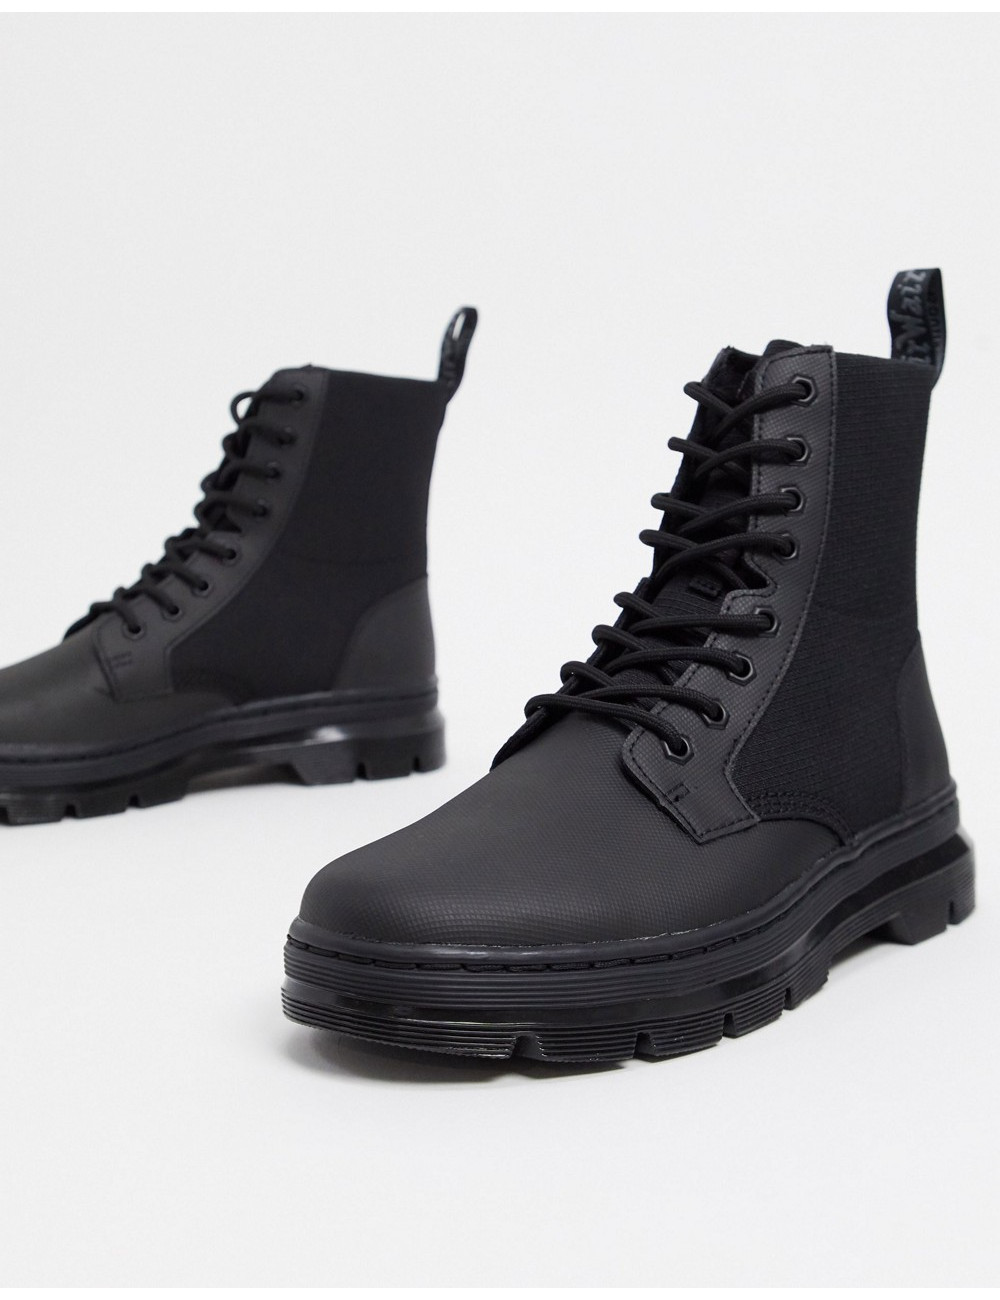 Dr Martens coombs ii boots...